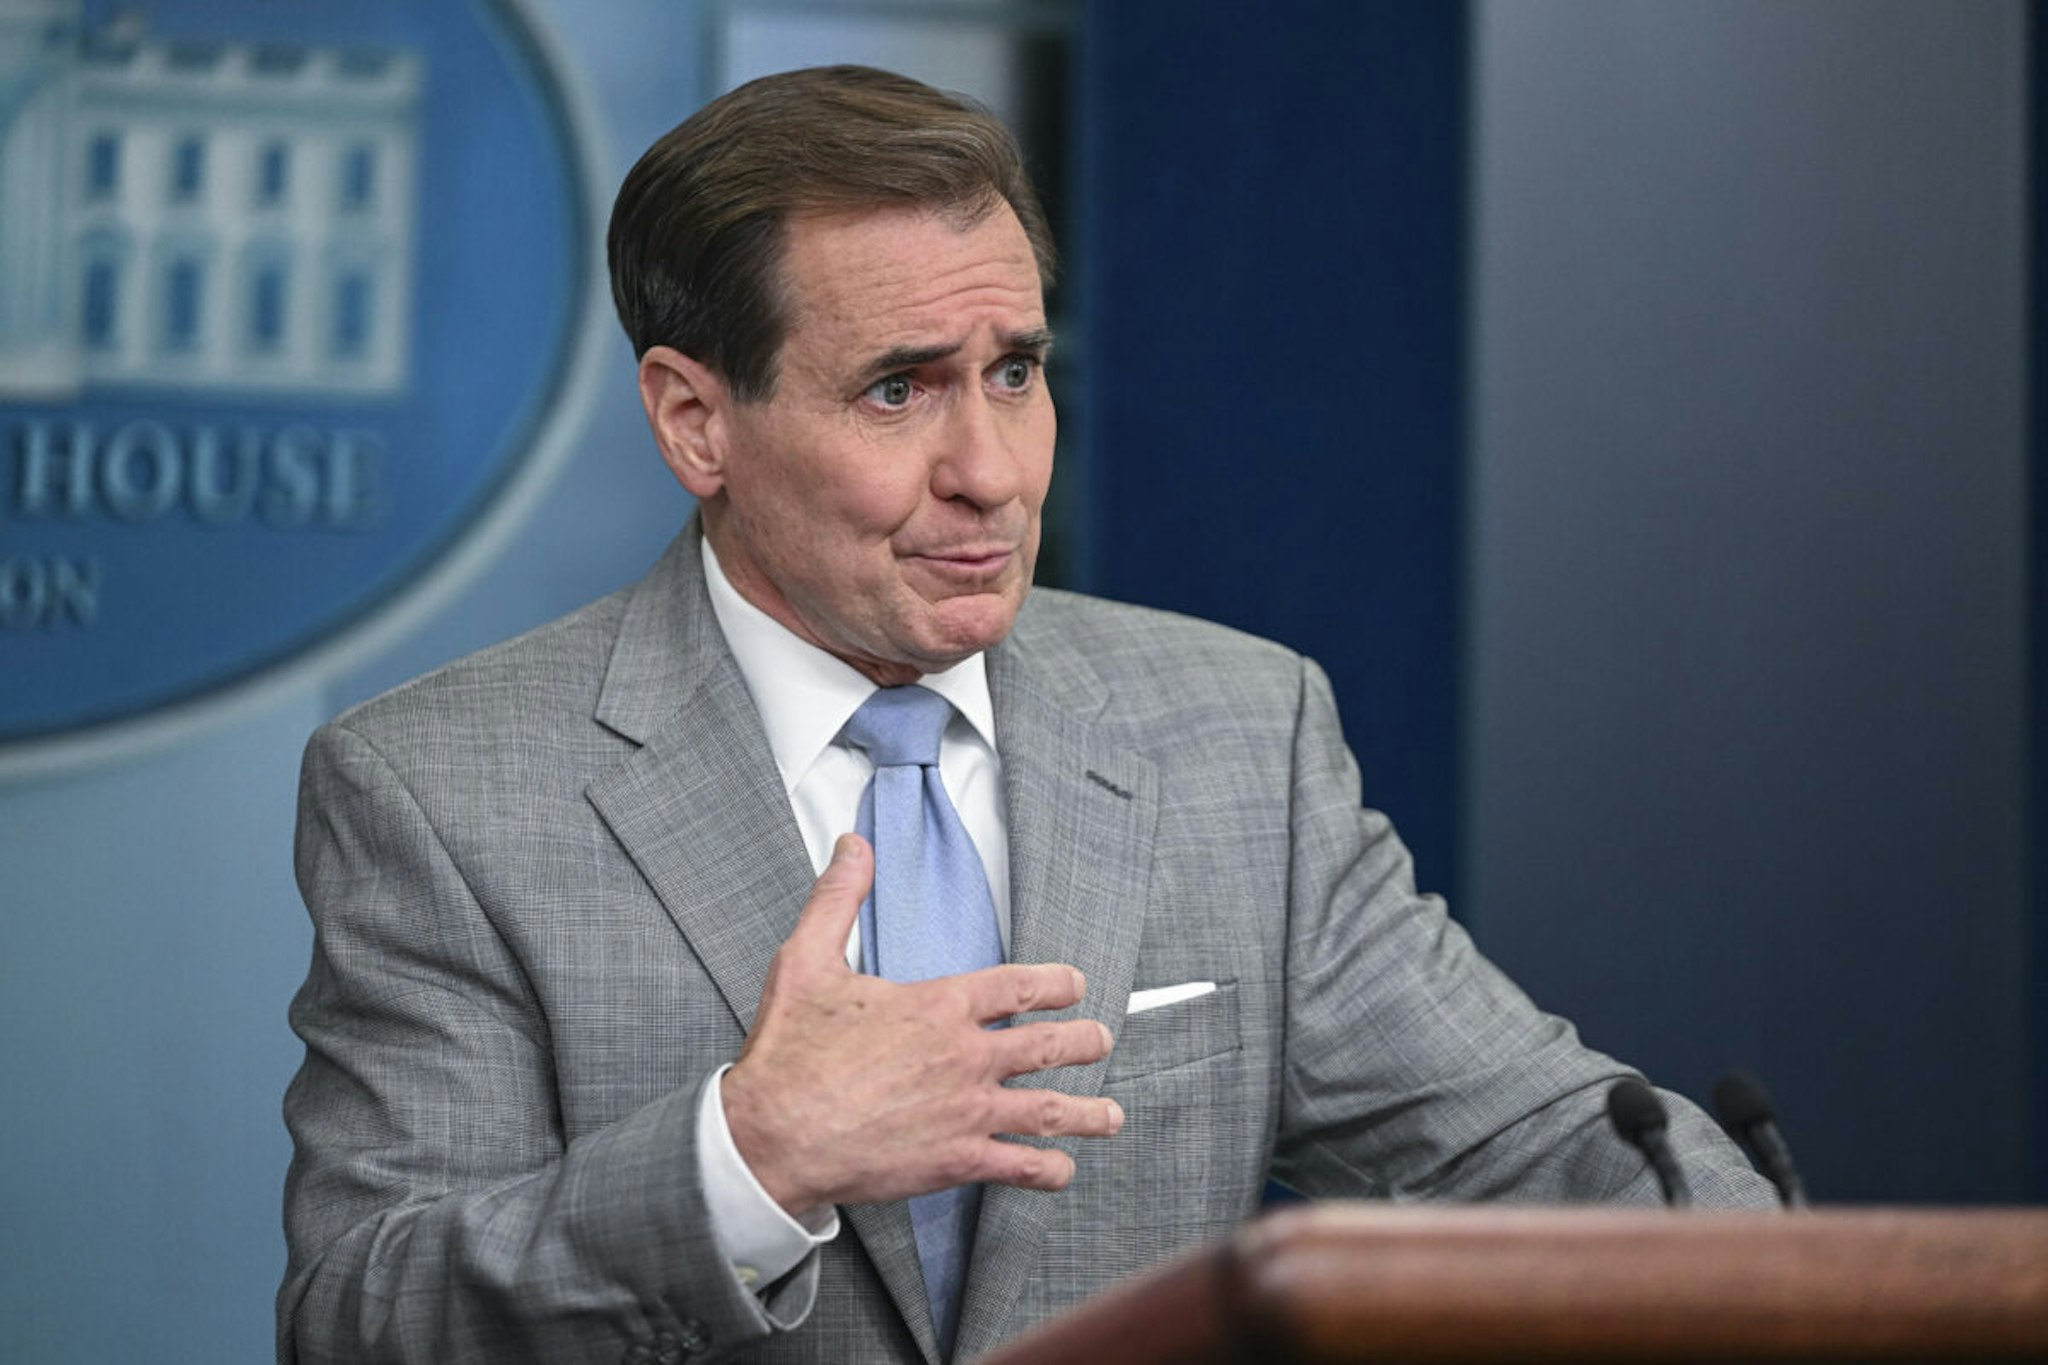 National Security Council Coordinator Admiral John Kirby speaks during the White House Press Briefing at the White House in Washington D.C., United States on June 26, 2023.